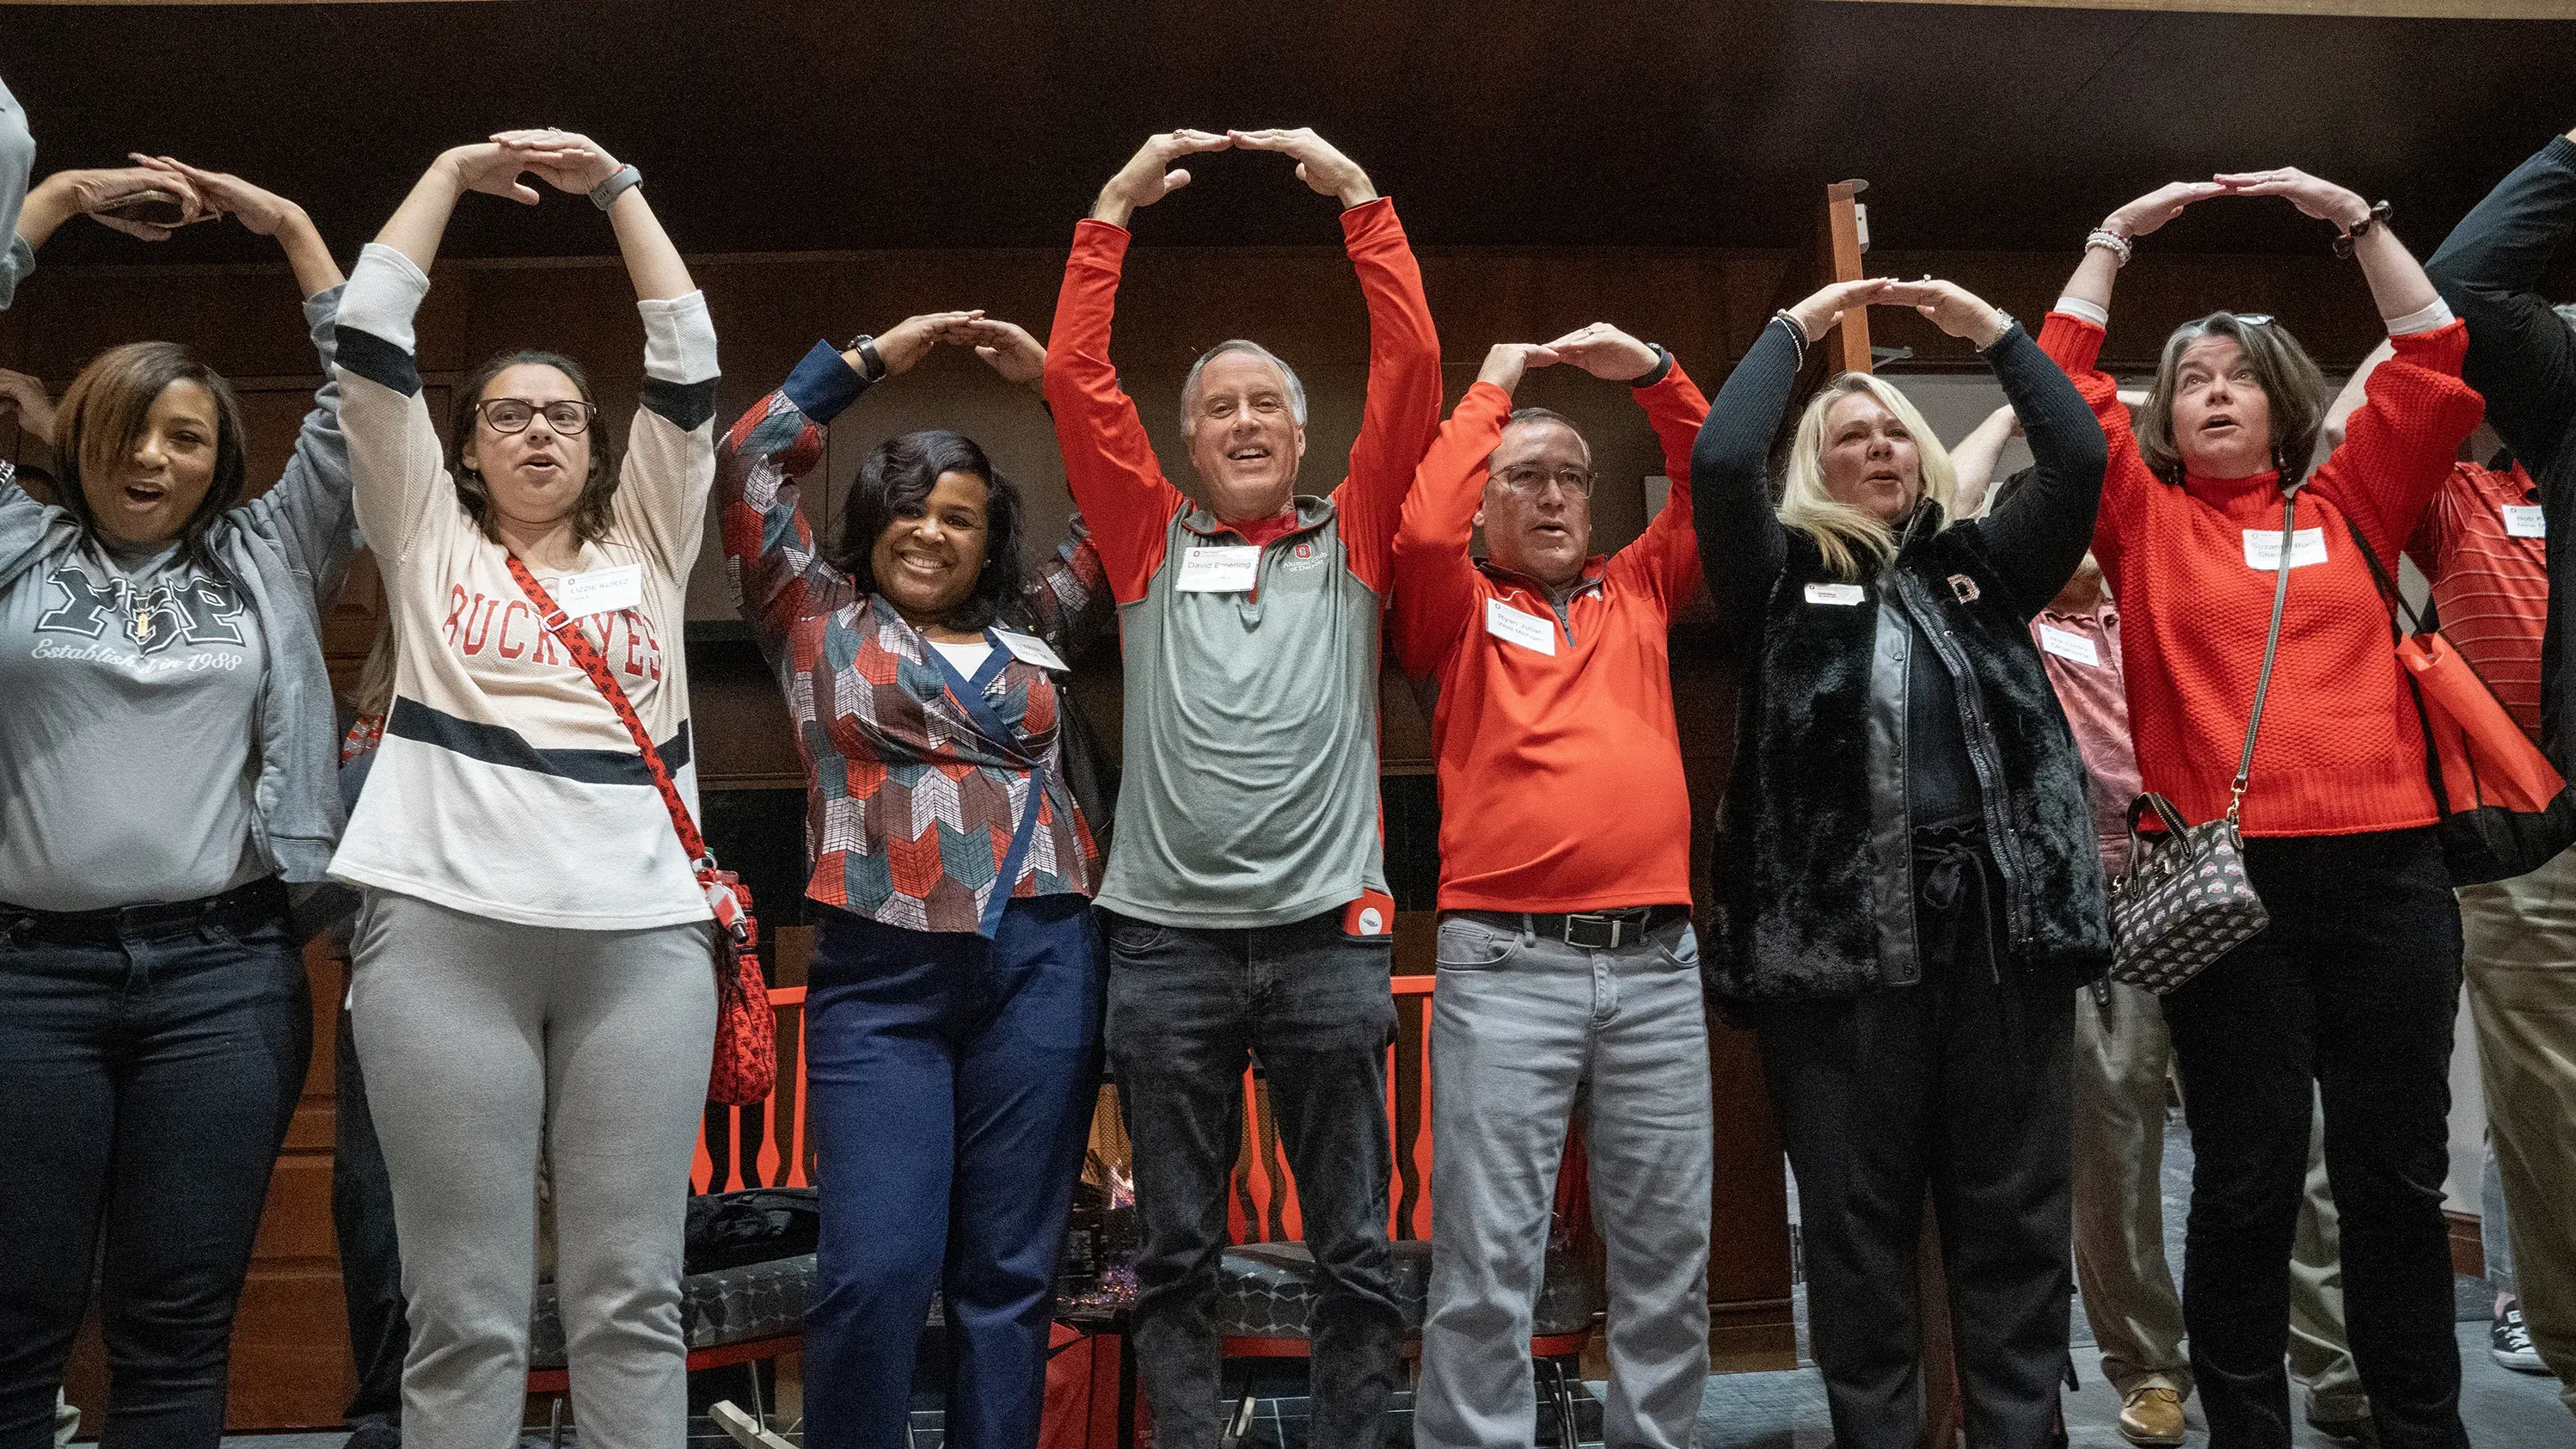 Alumni club/society leaders at the Club Society Symposium making an 'O' with their arms